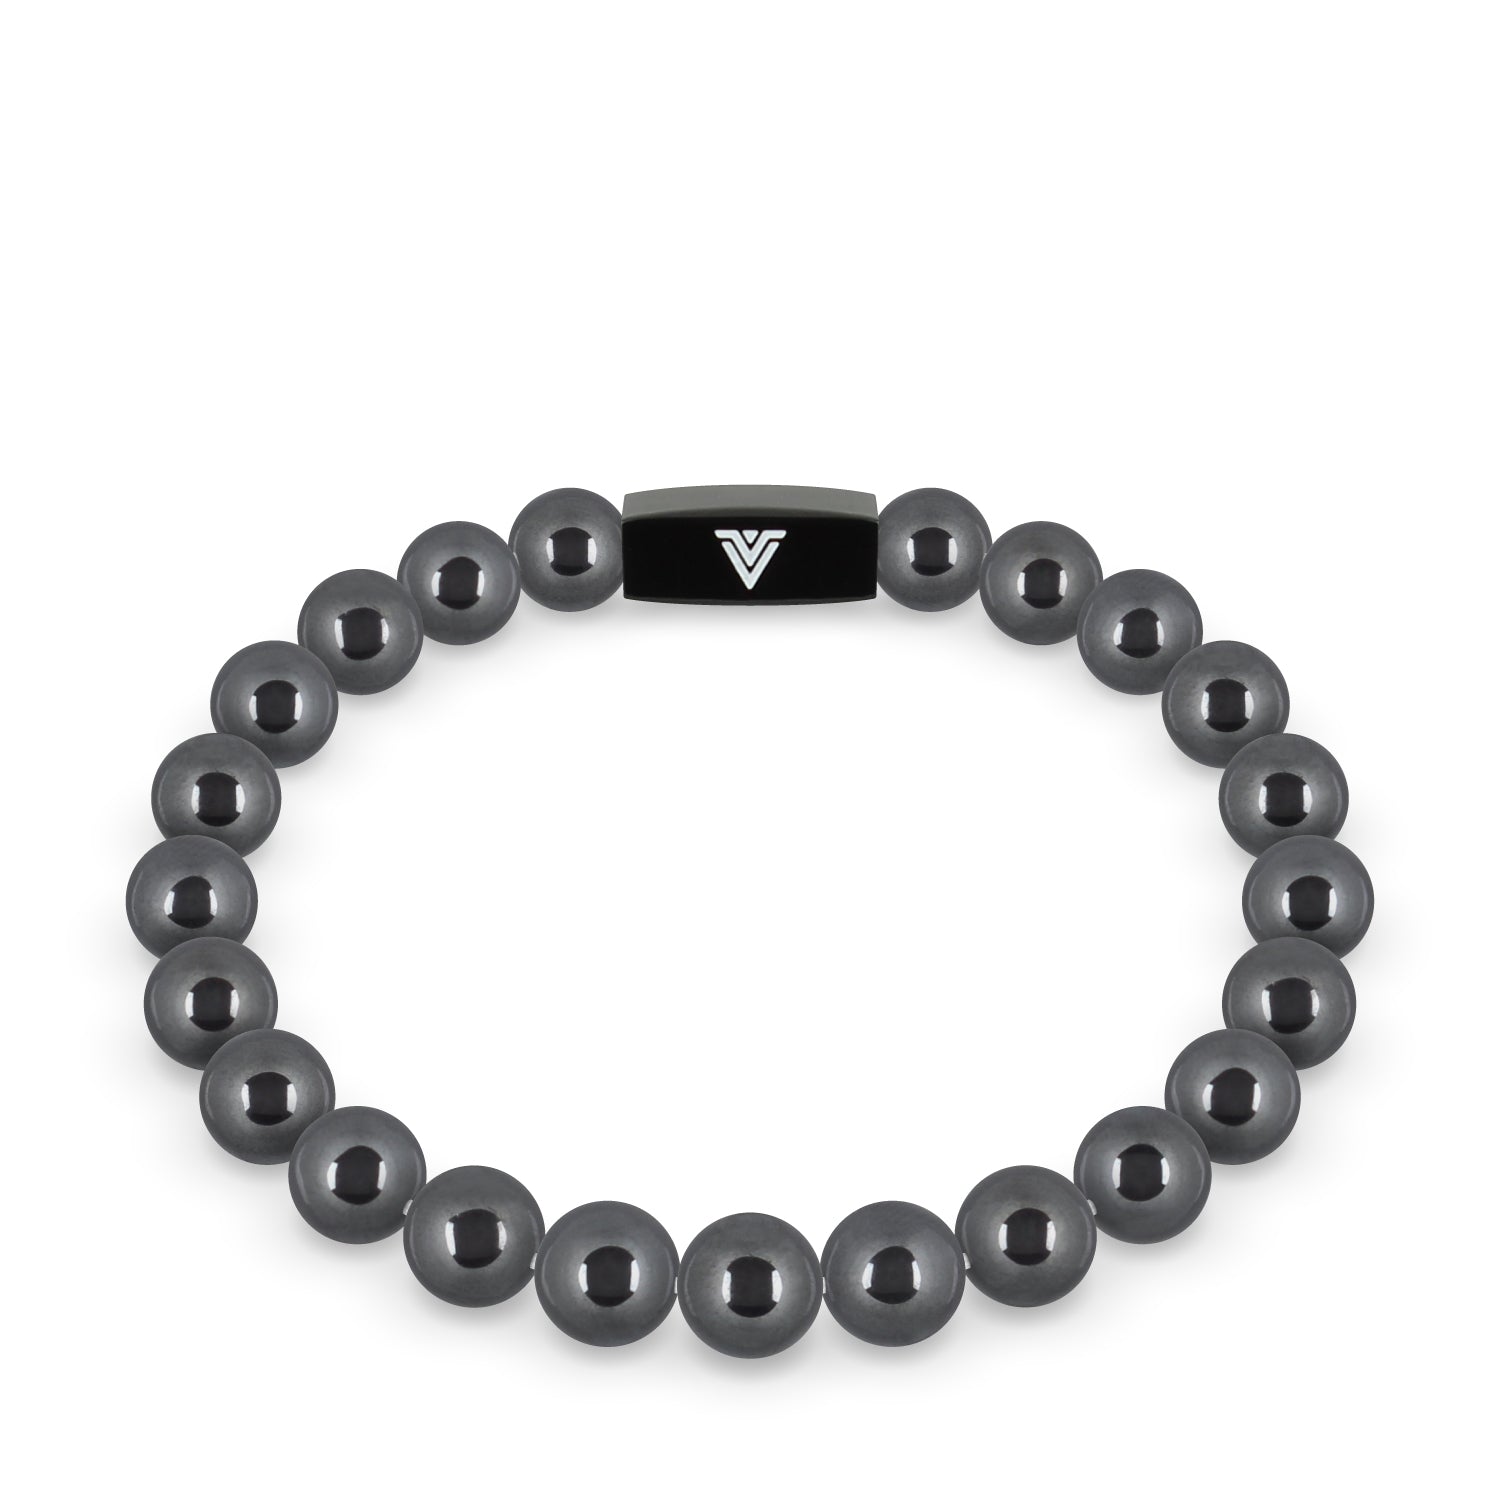 Front view of an 8mm Hematite crystal beaded stretch bracelet with black stainless steel logo bead made by Voltlin